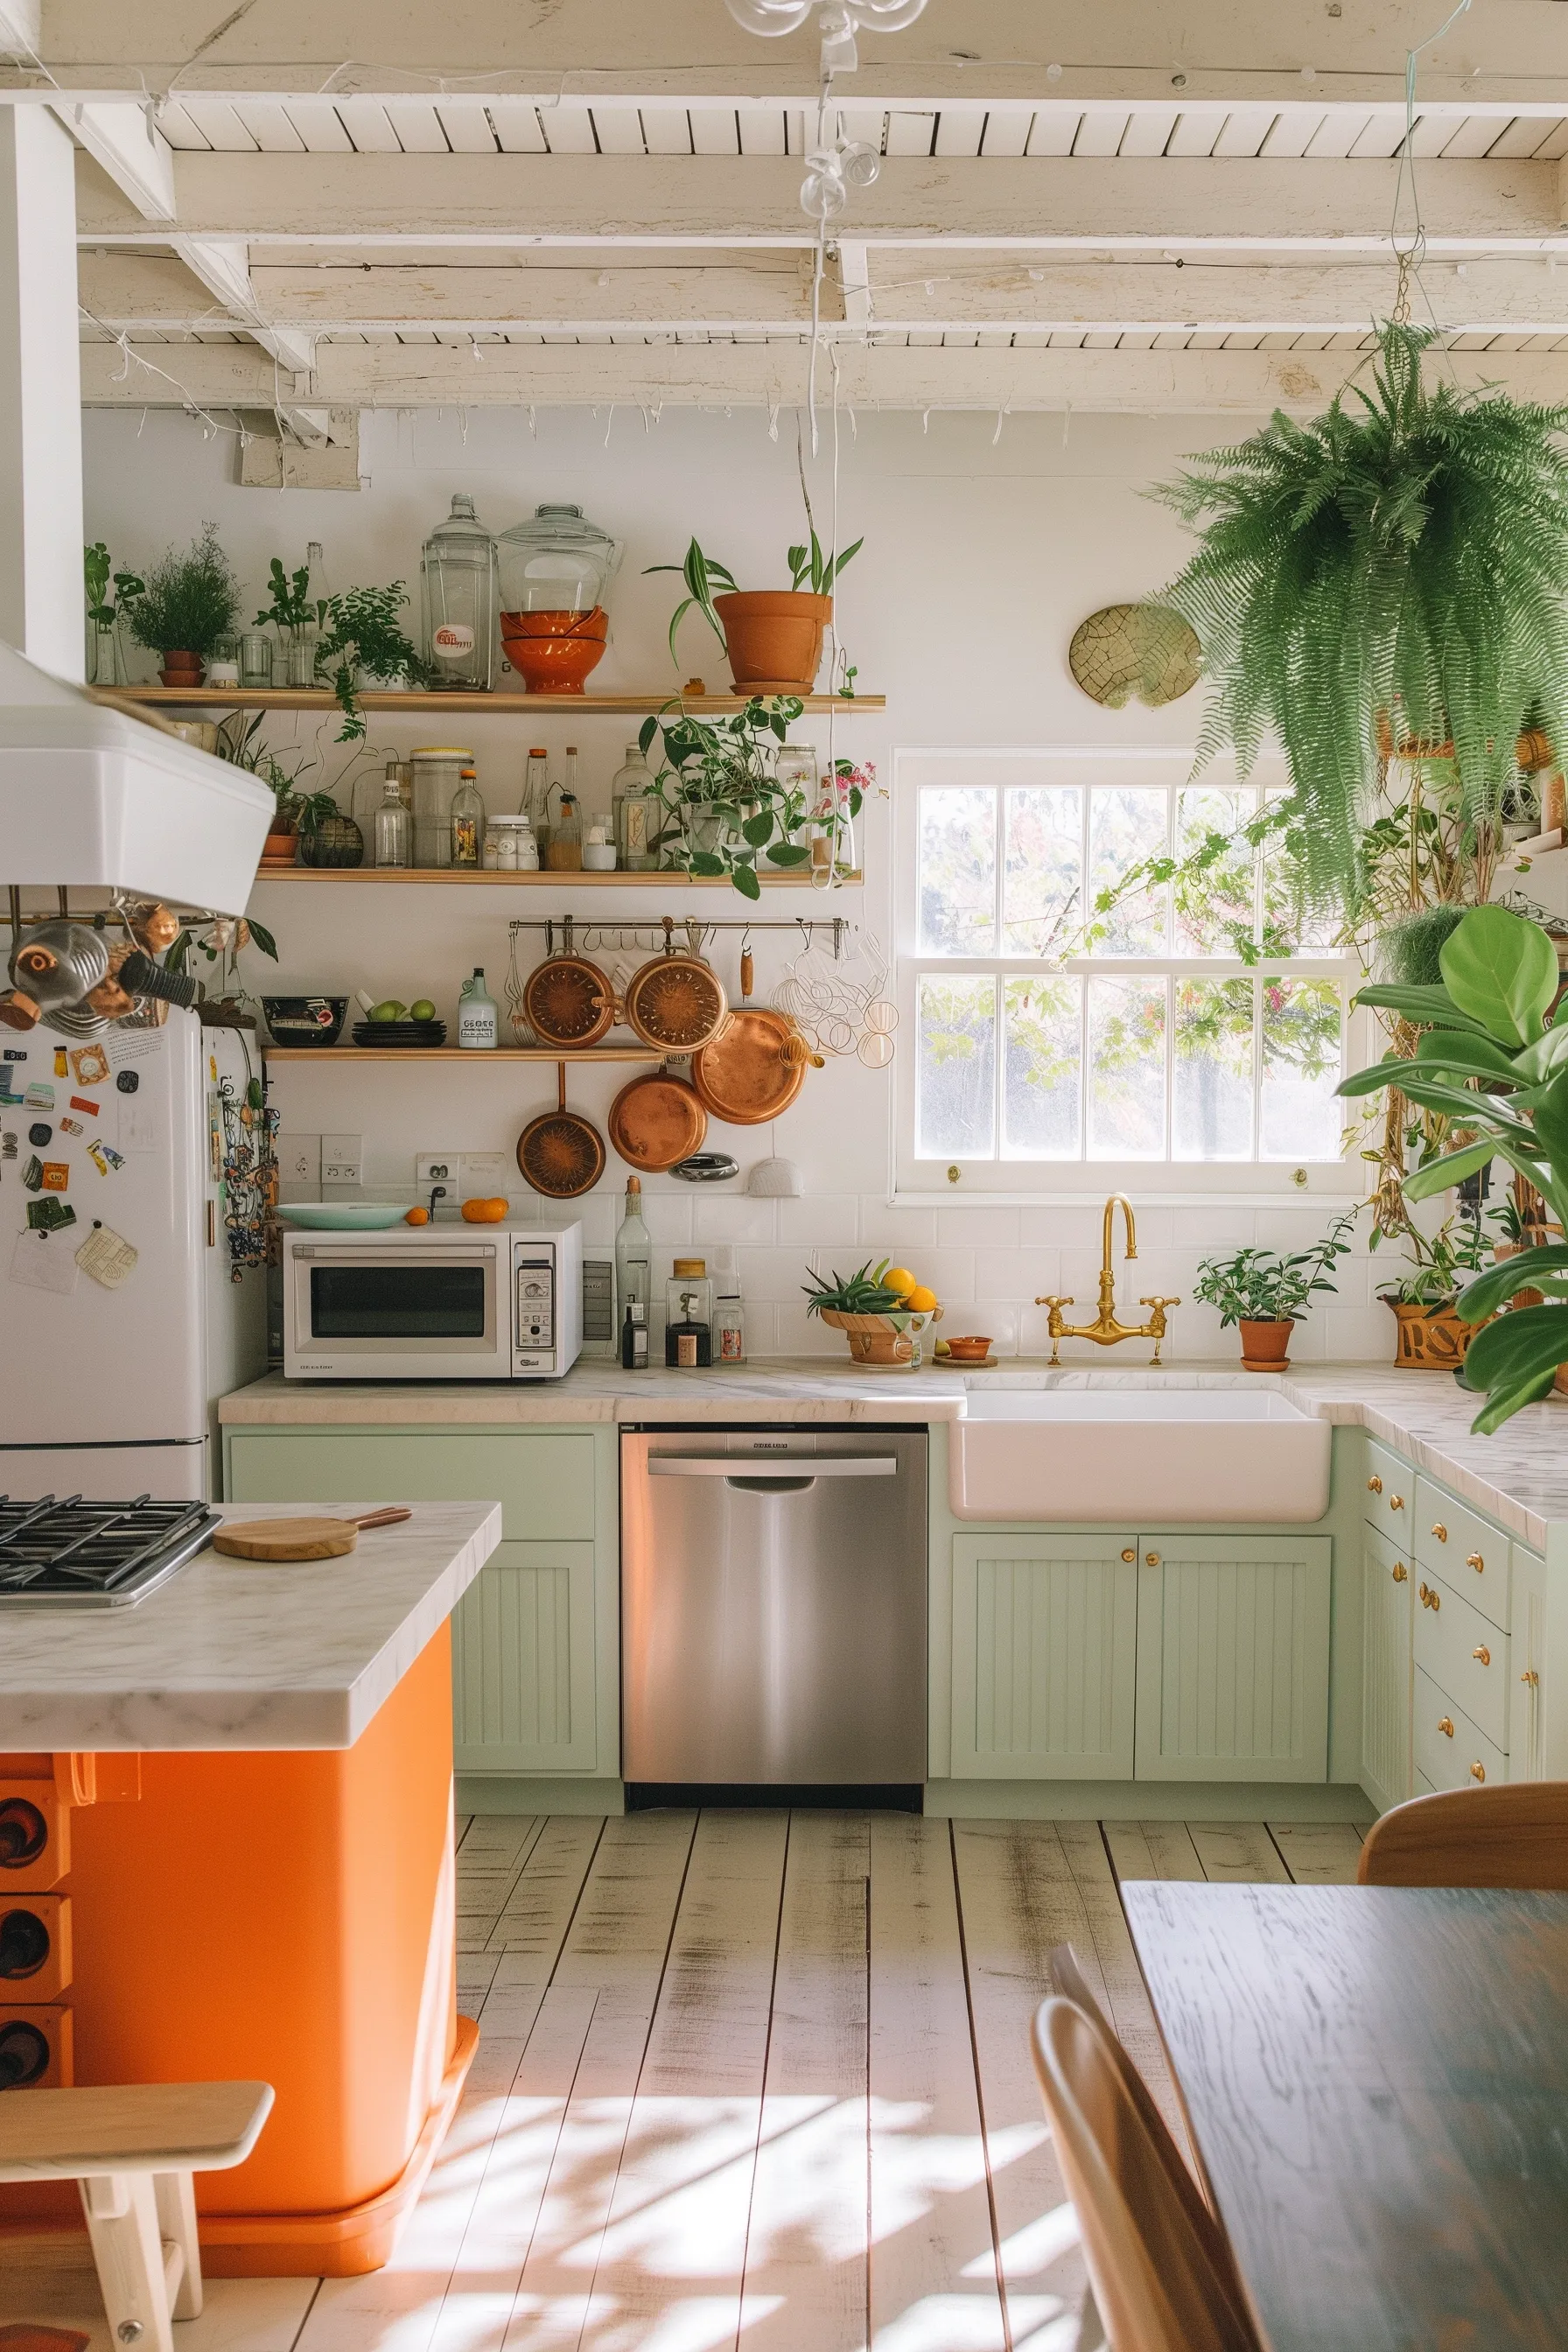 A sage green kitchen embracing bright colors